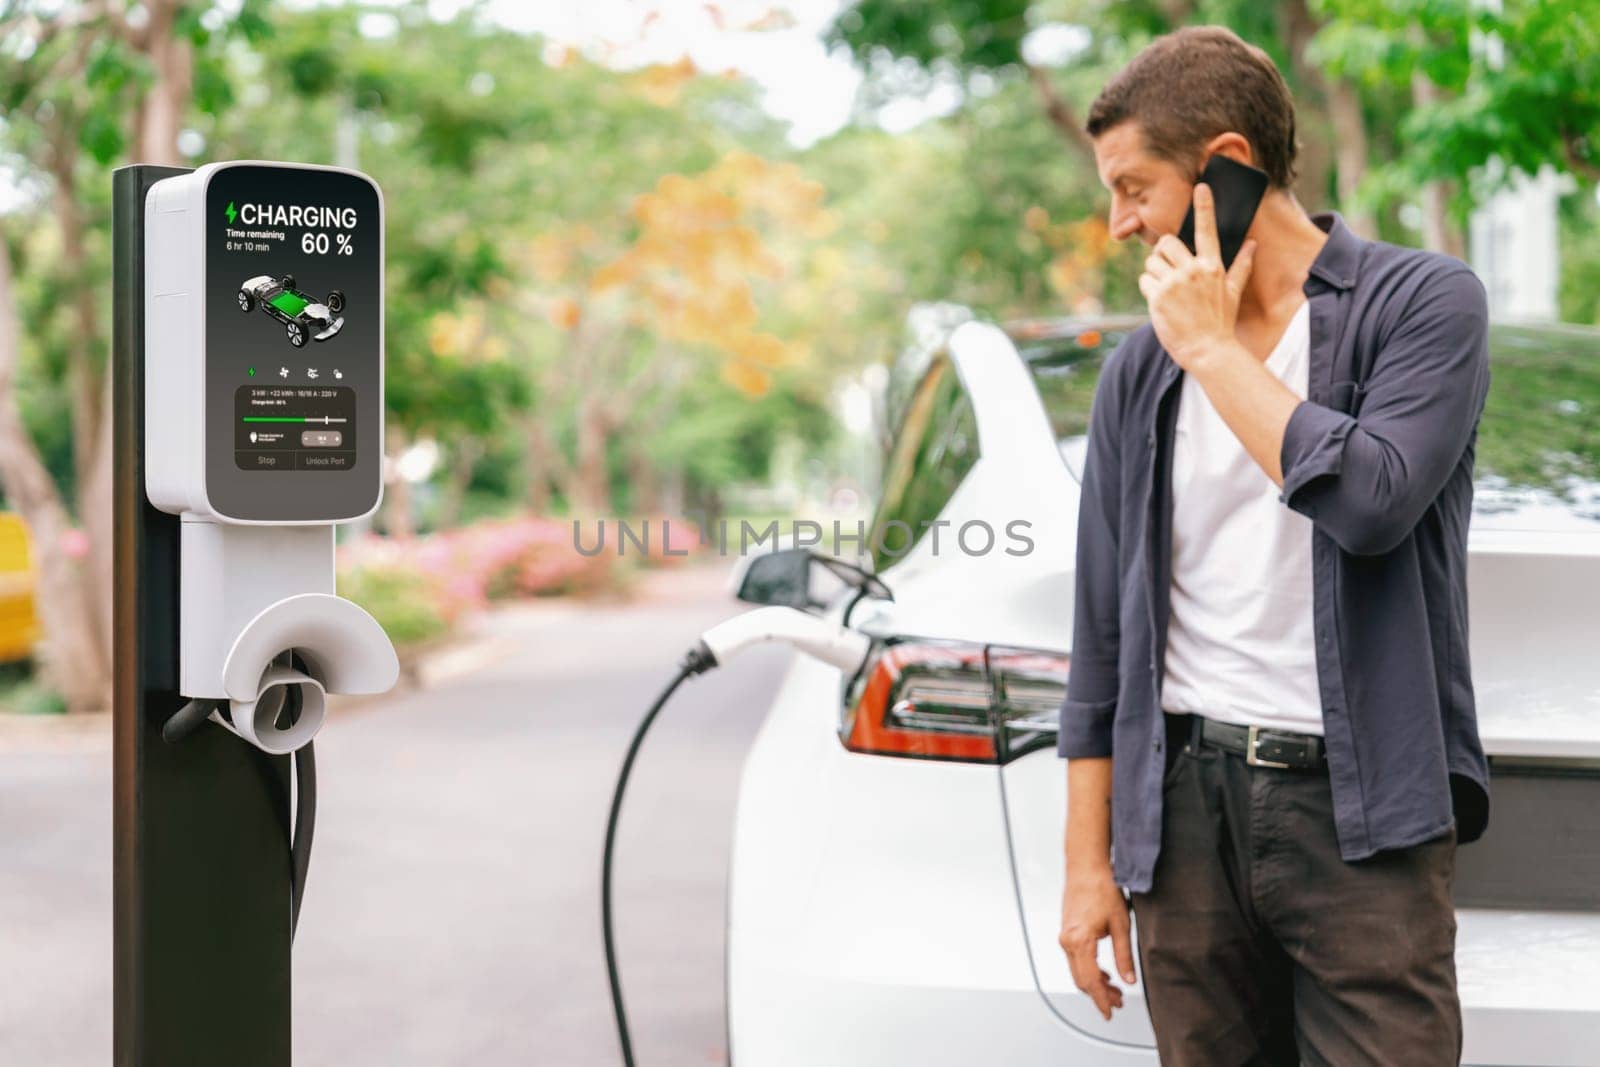 Man talking on smartphone while recharging electric car. Exalt by biancoblue